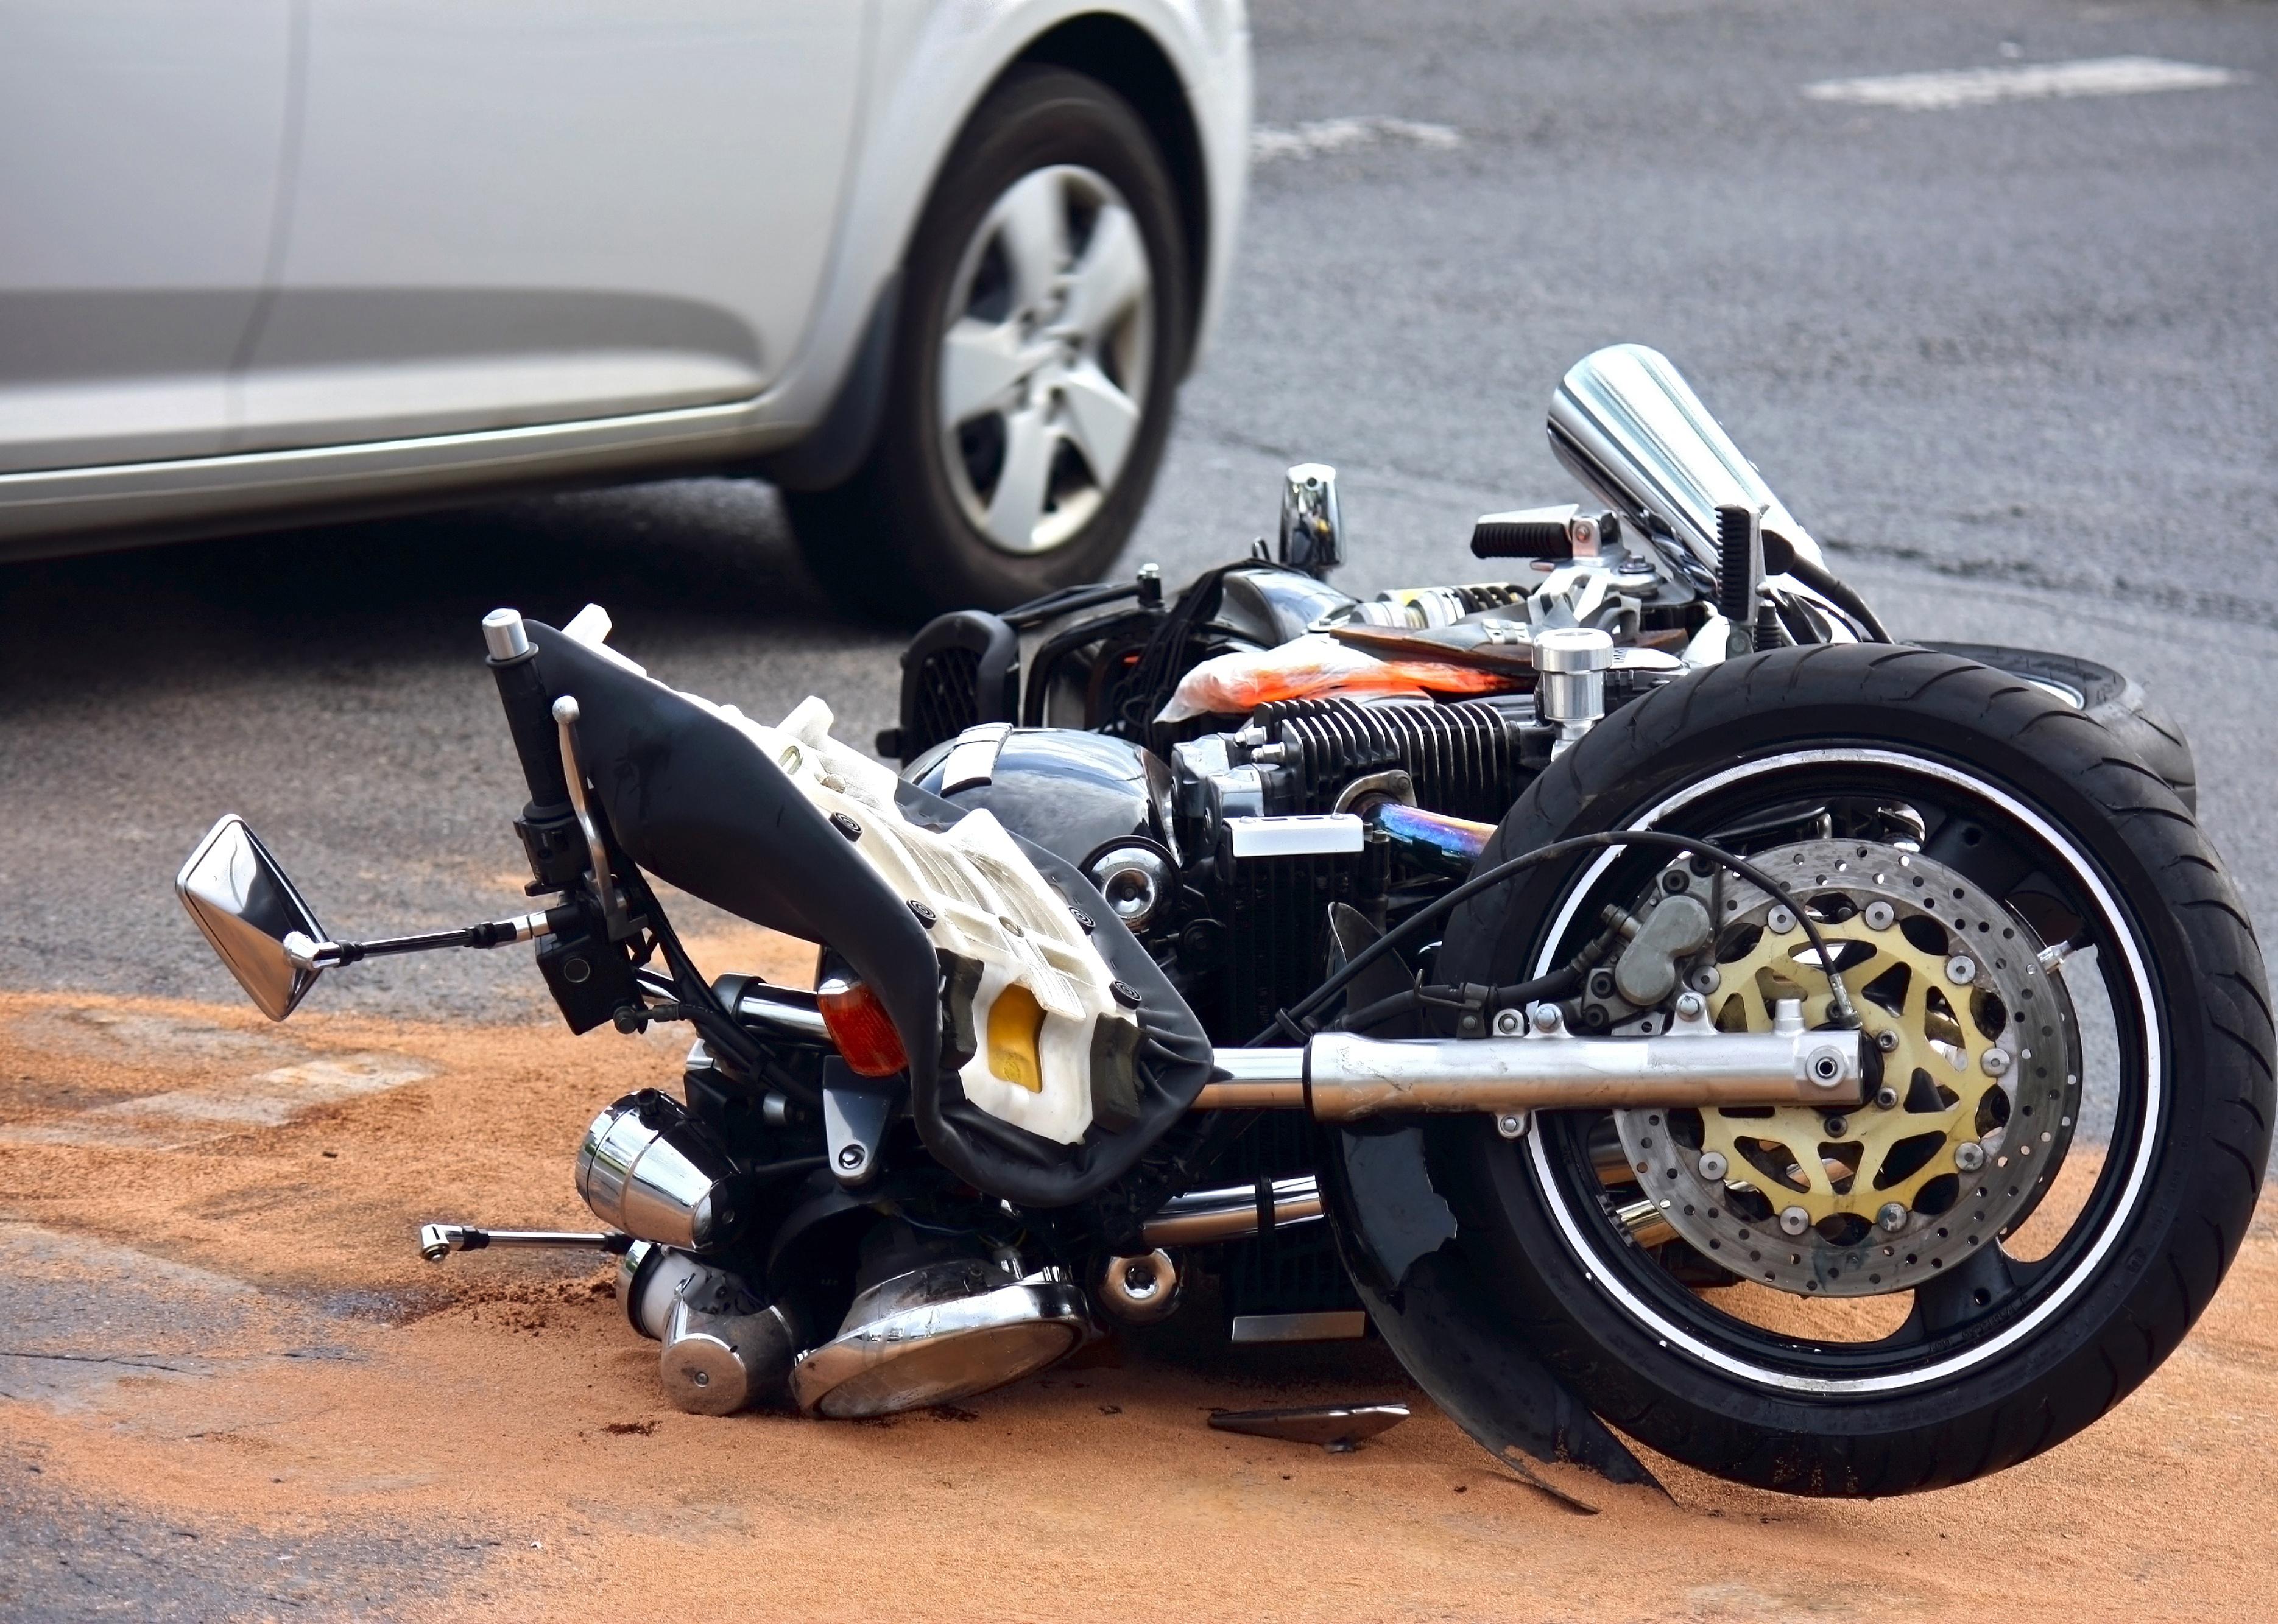 Motorbike accident on a city street.